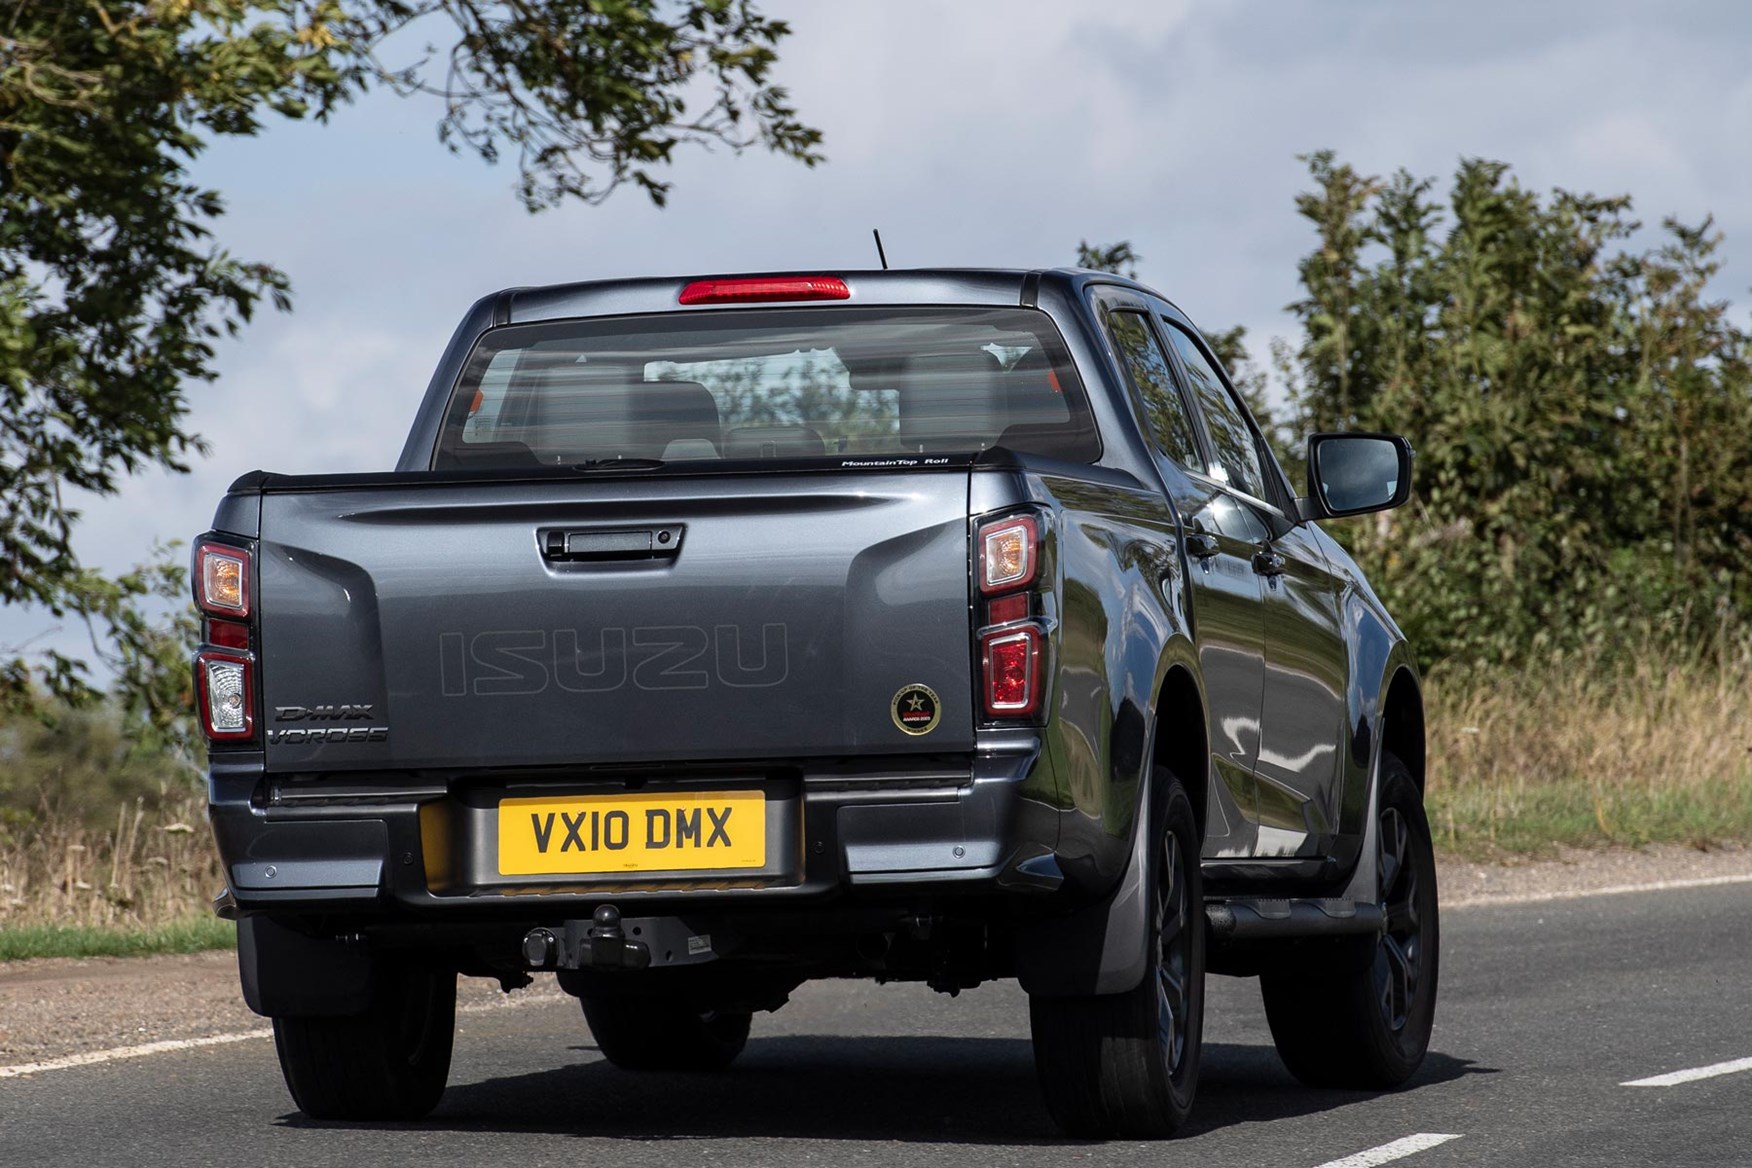 The D-Max's ride is decent by pickup standards, but the latest rivals are better.